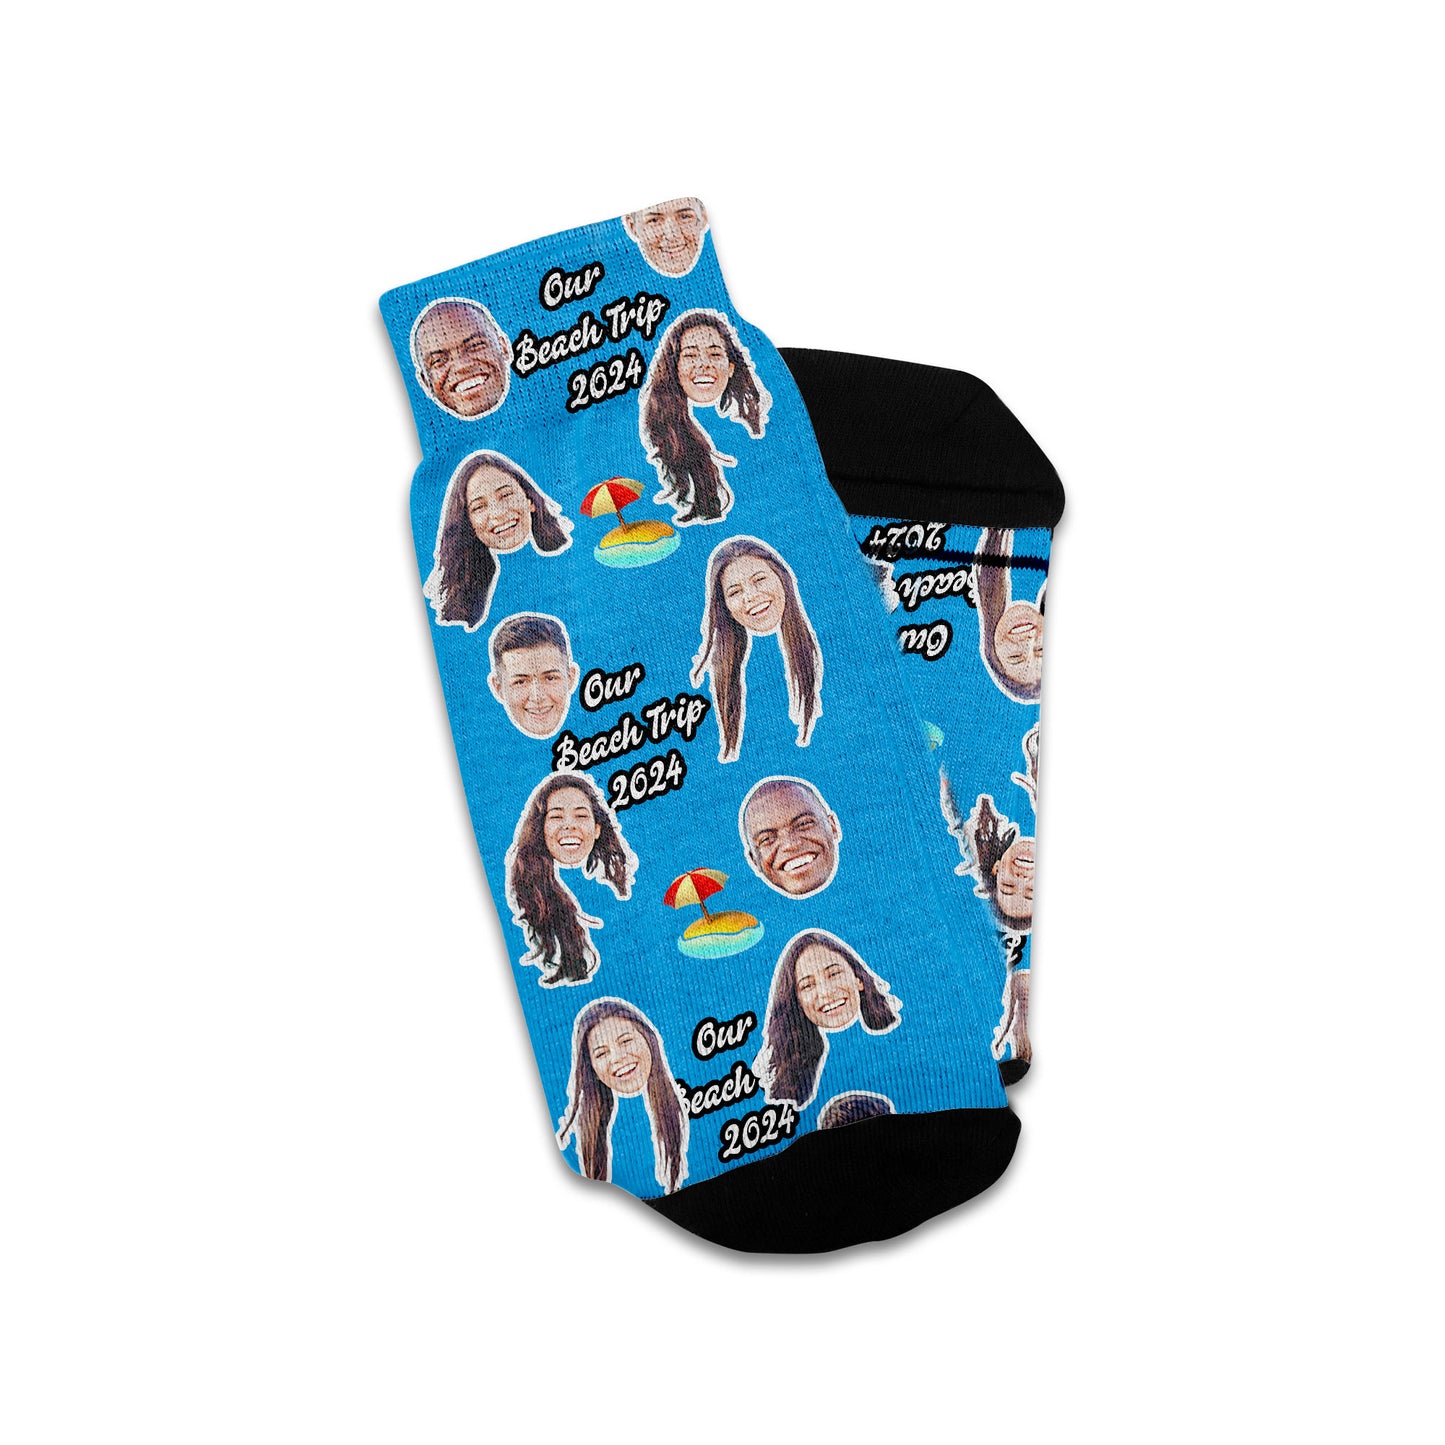 personalized gift for trip lovers, weekend, birthday road trip socks with faces